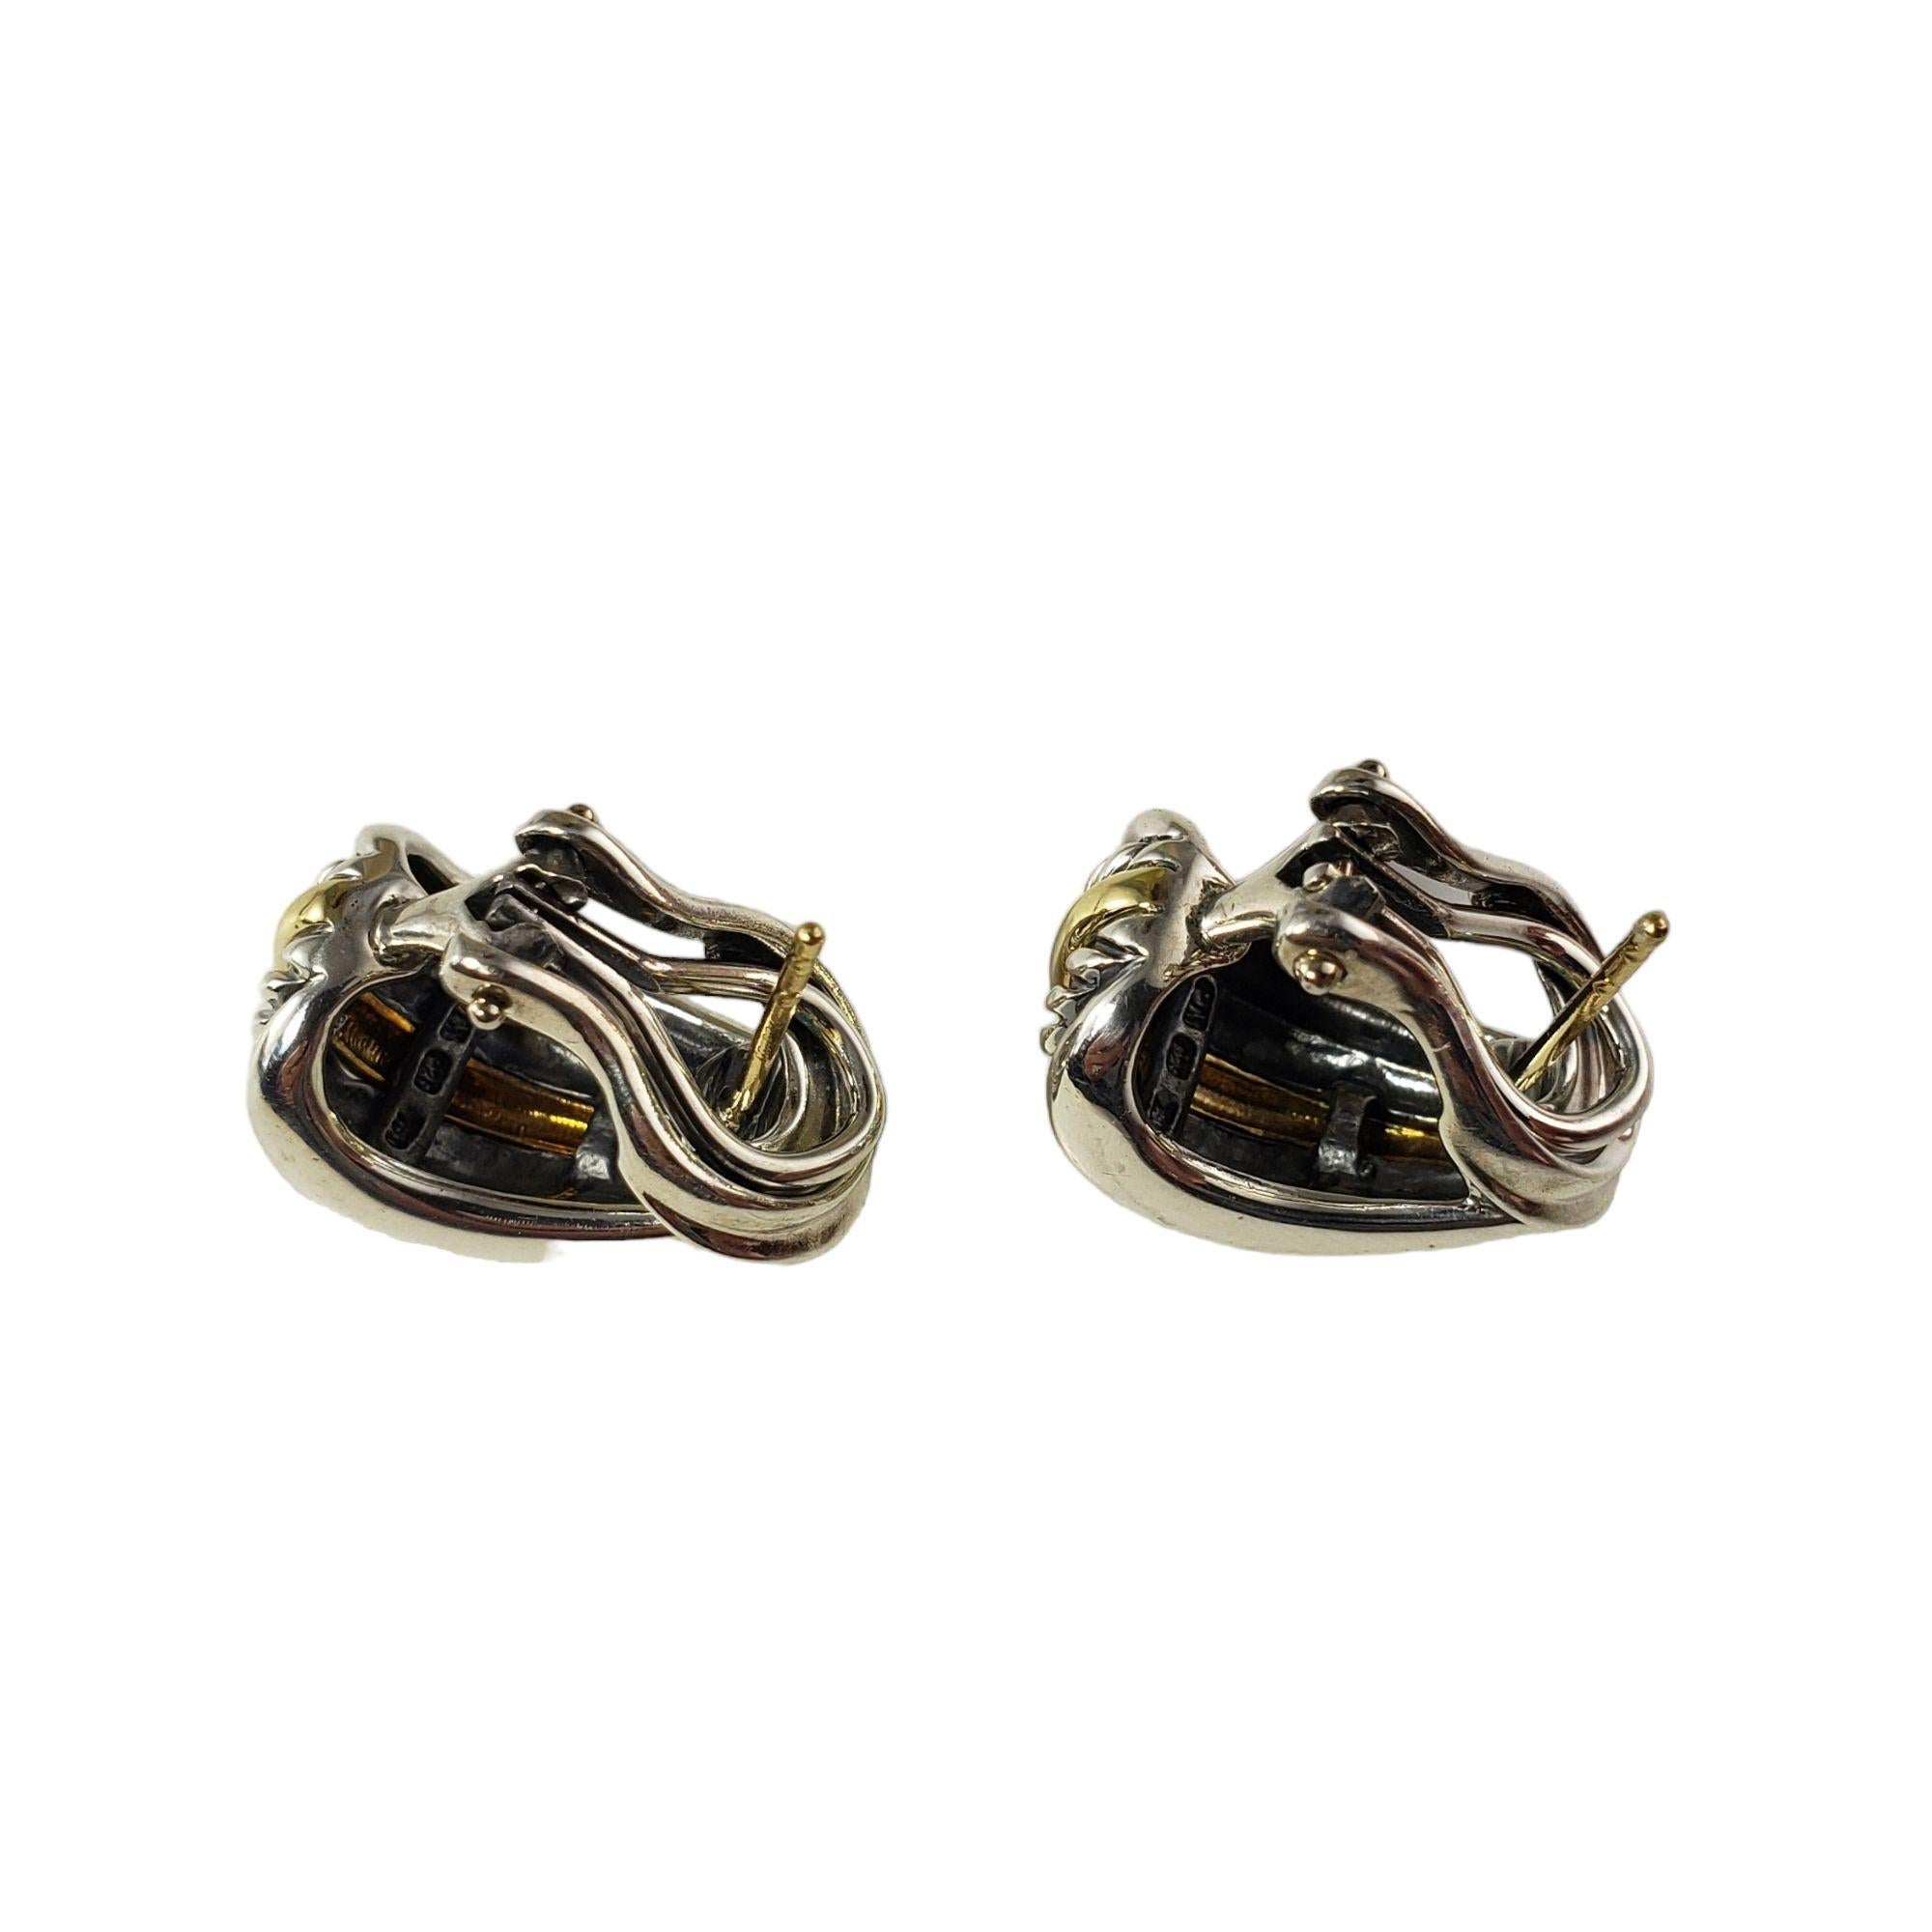 Vintage David Yurman Sterling Silver and 18 Karat Yellow Gold Cable Earrings-

These elegant earrings are crafted in meticulously detailed sterling silver and 18K yellow gold. Omega back closures.

Size: 20 mm x 12 mm

Weight: 12.3 gr./ 7.9